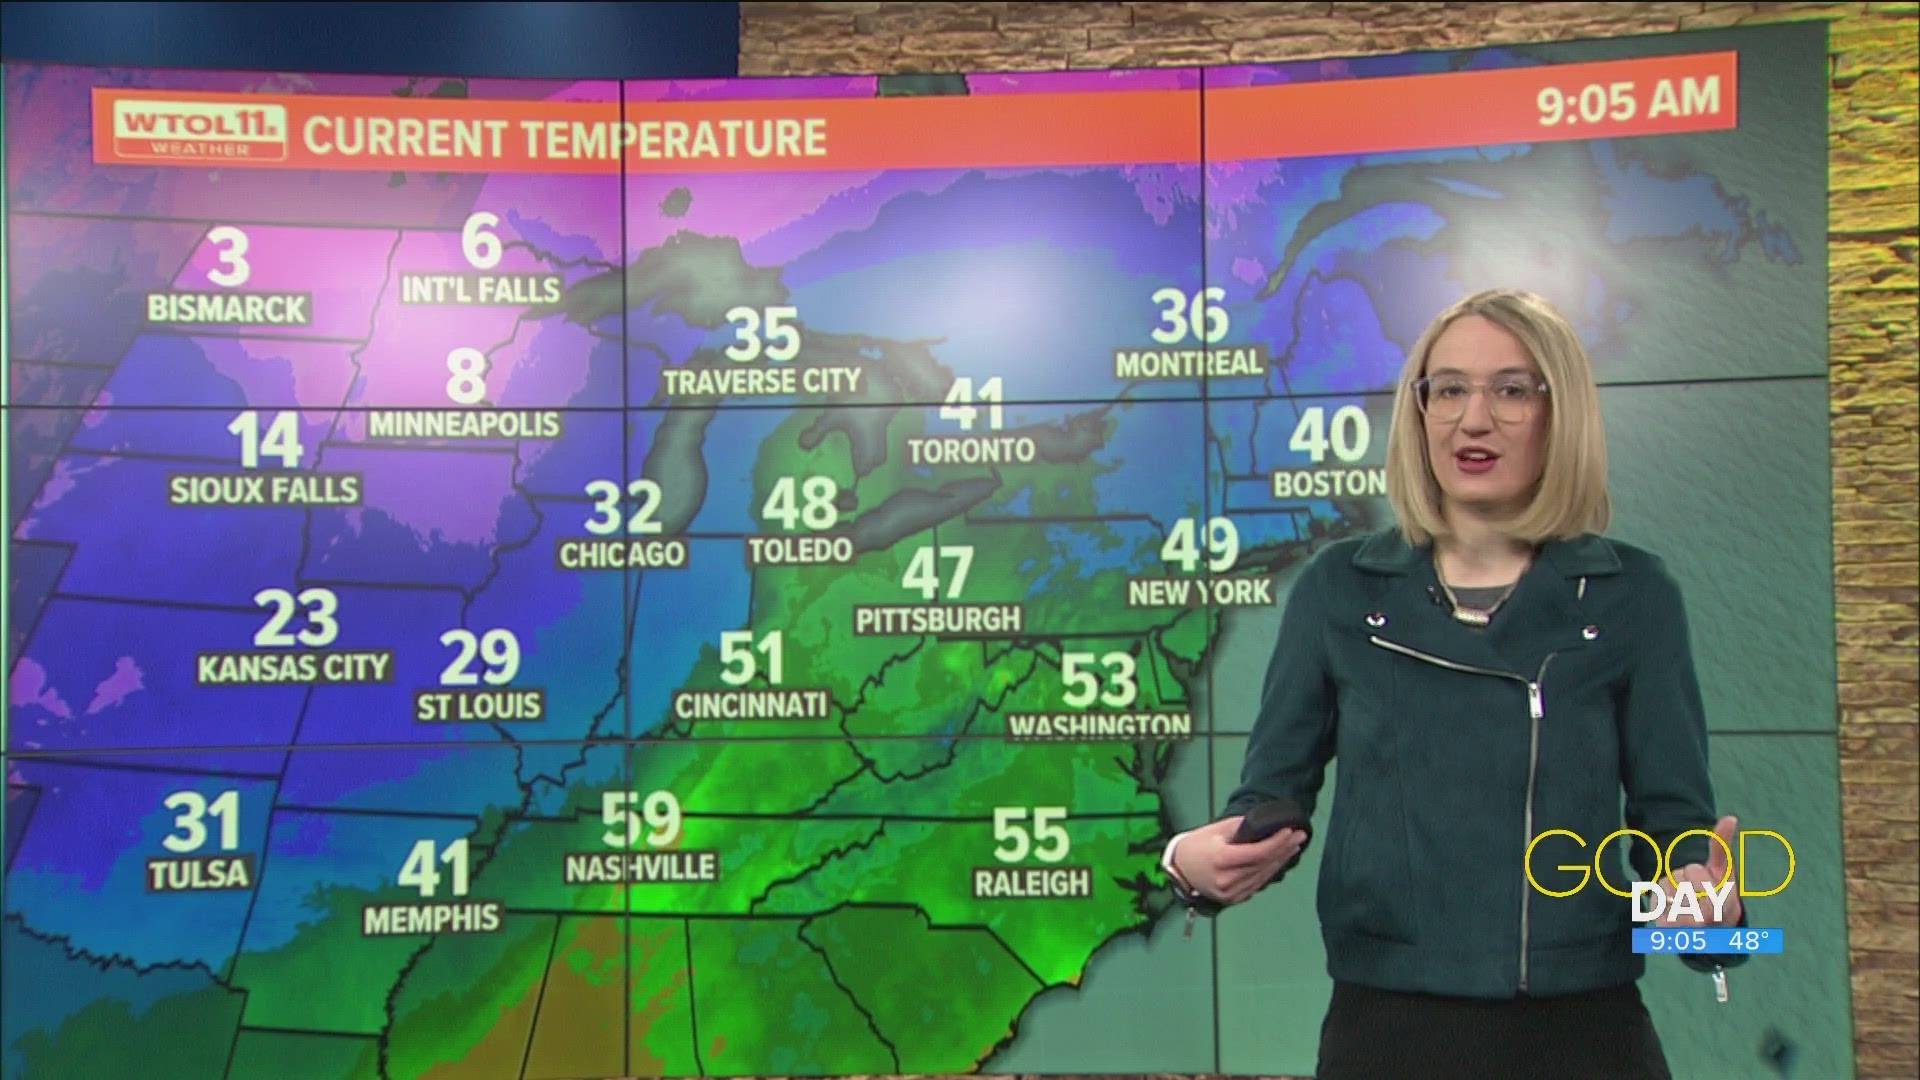 Expect a cool down ahead of a chilly weekend with temps in the low 30s.